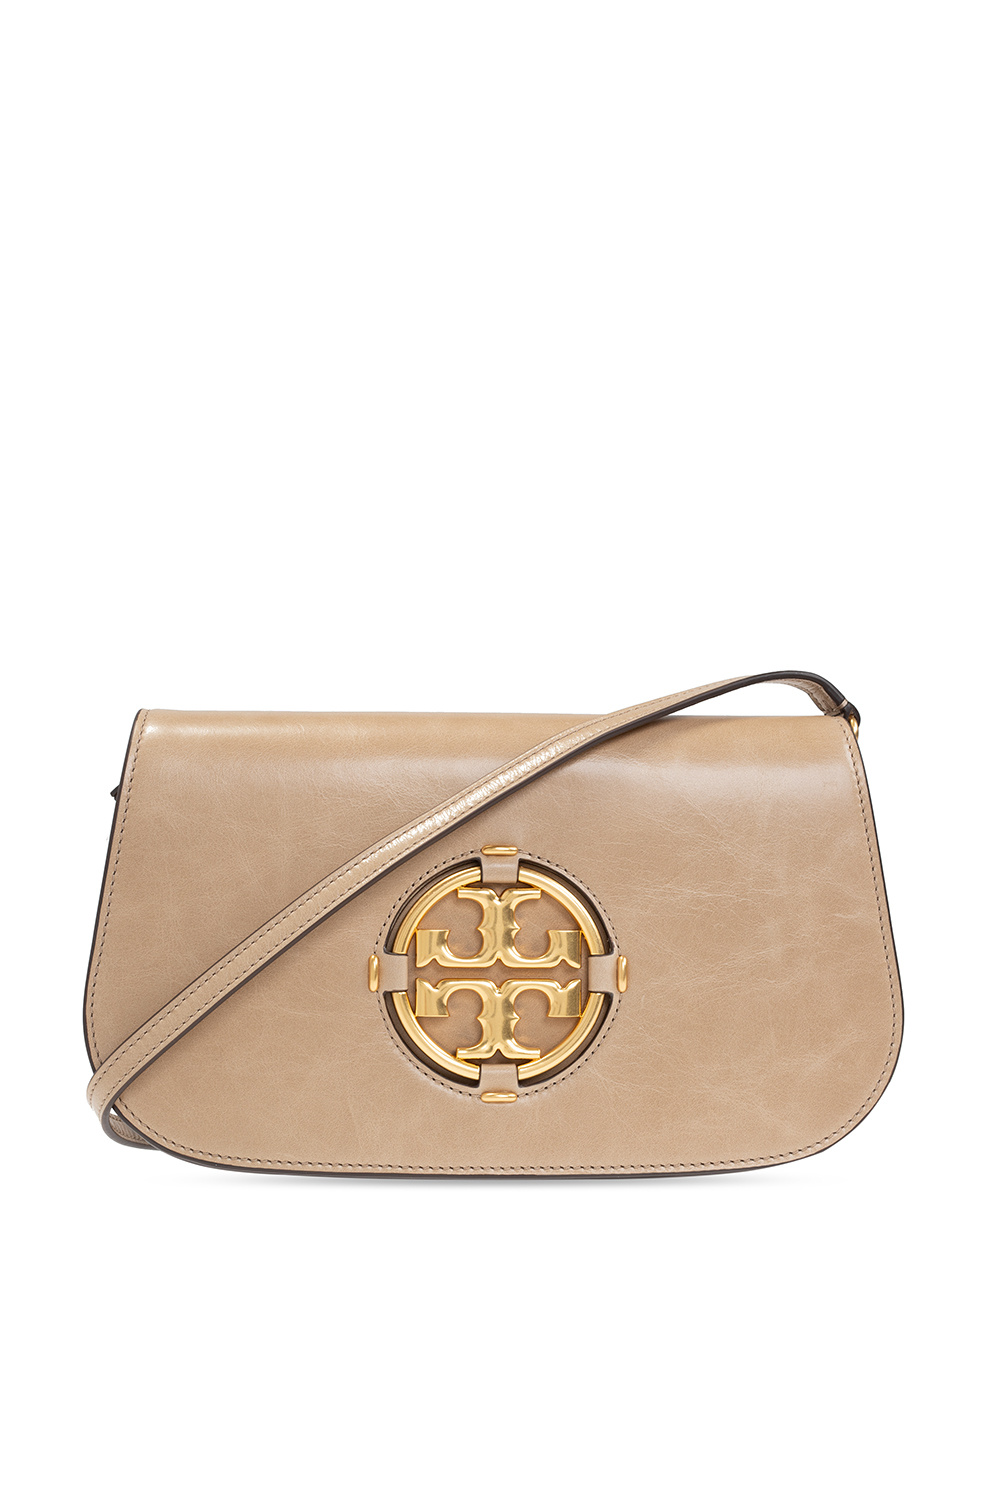 Tory Burch 'Miller Small' shoulder bag with logo